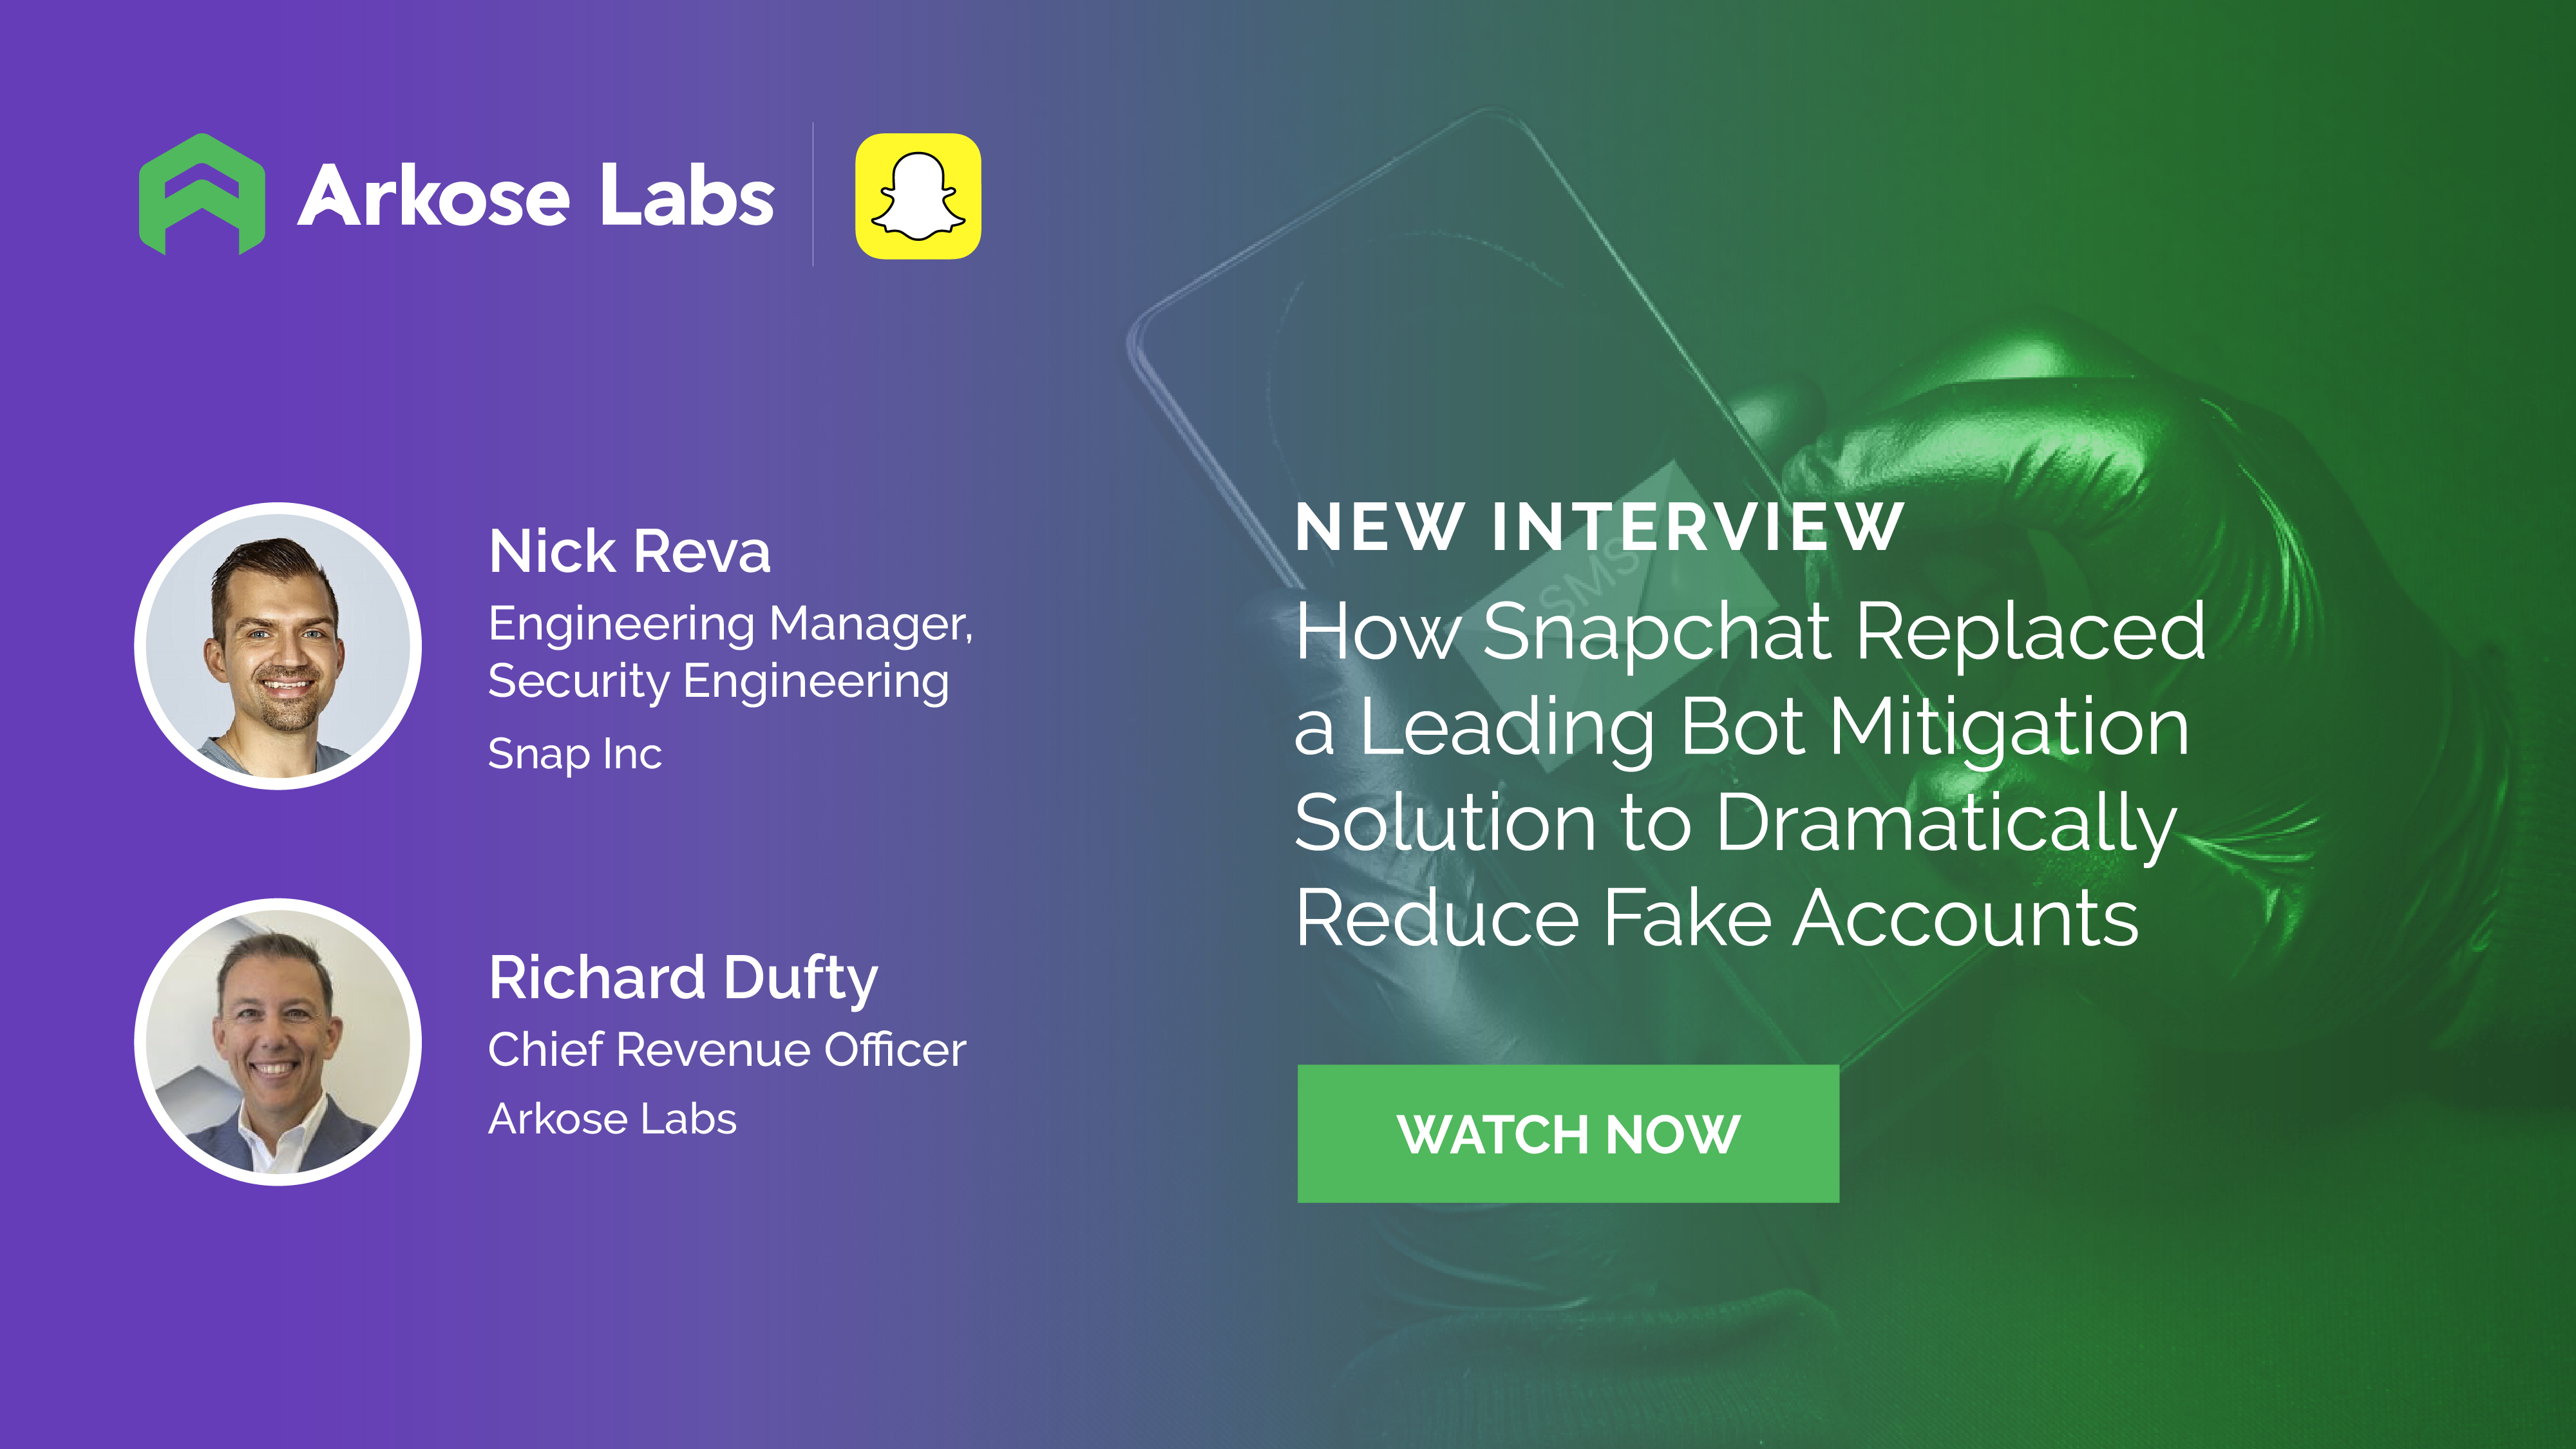 How Snapchat Replaced a Leading Bot Mitigation Solution to